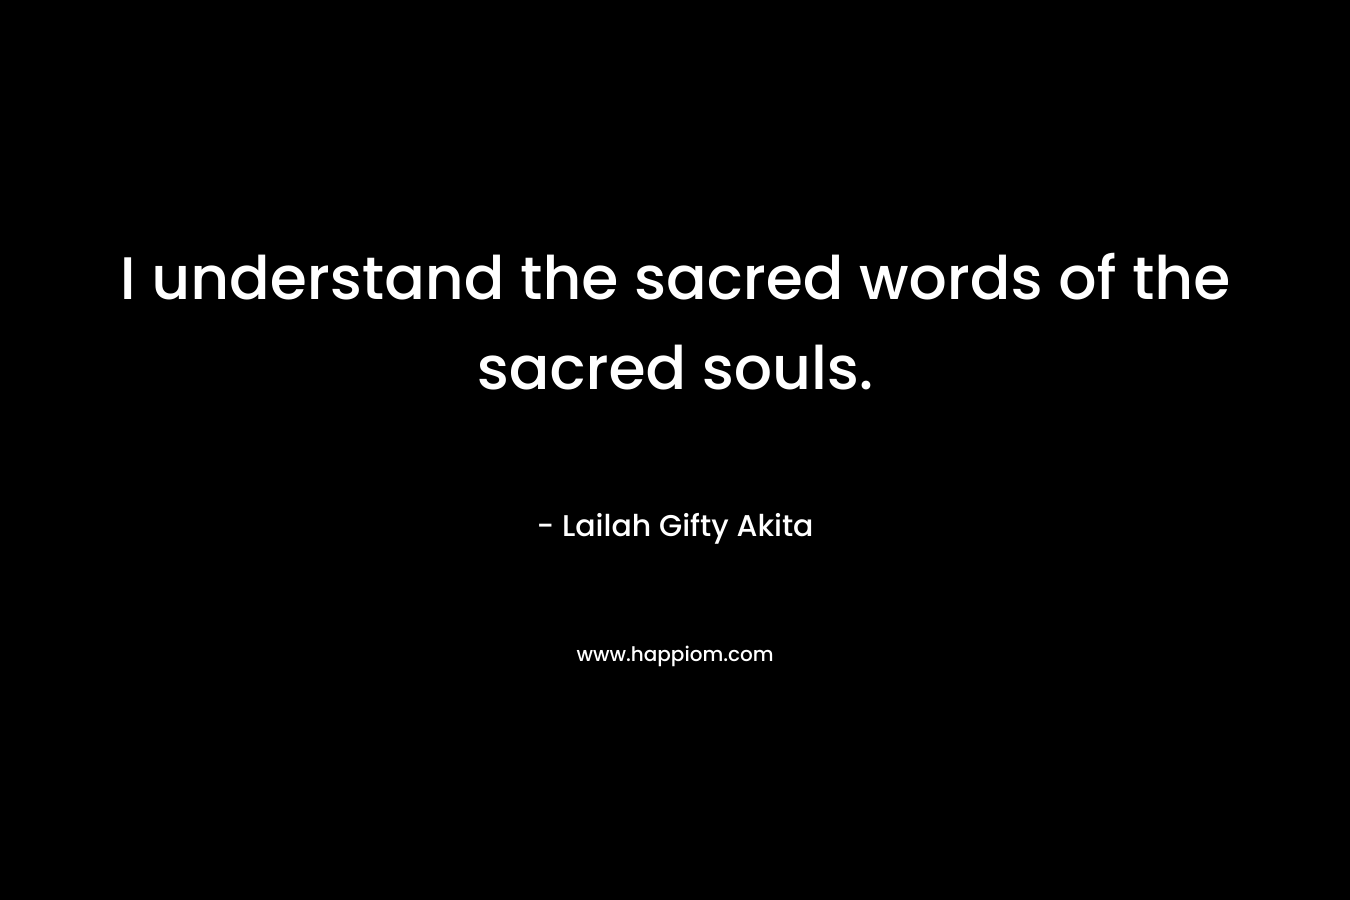 I understand the sacred words of the sacred souls.